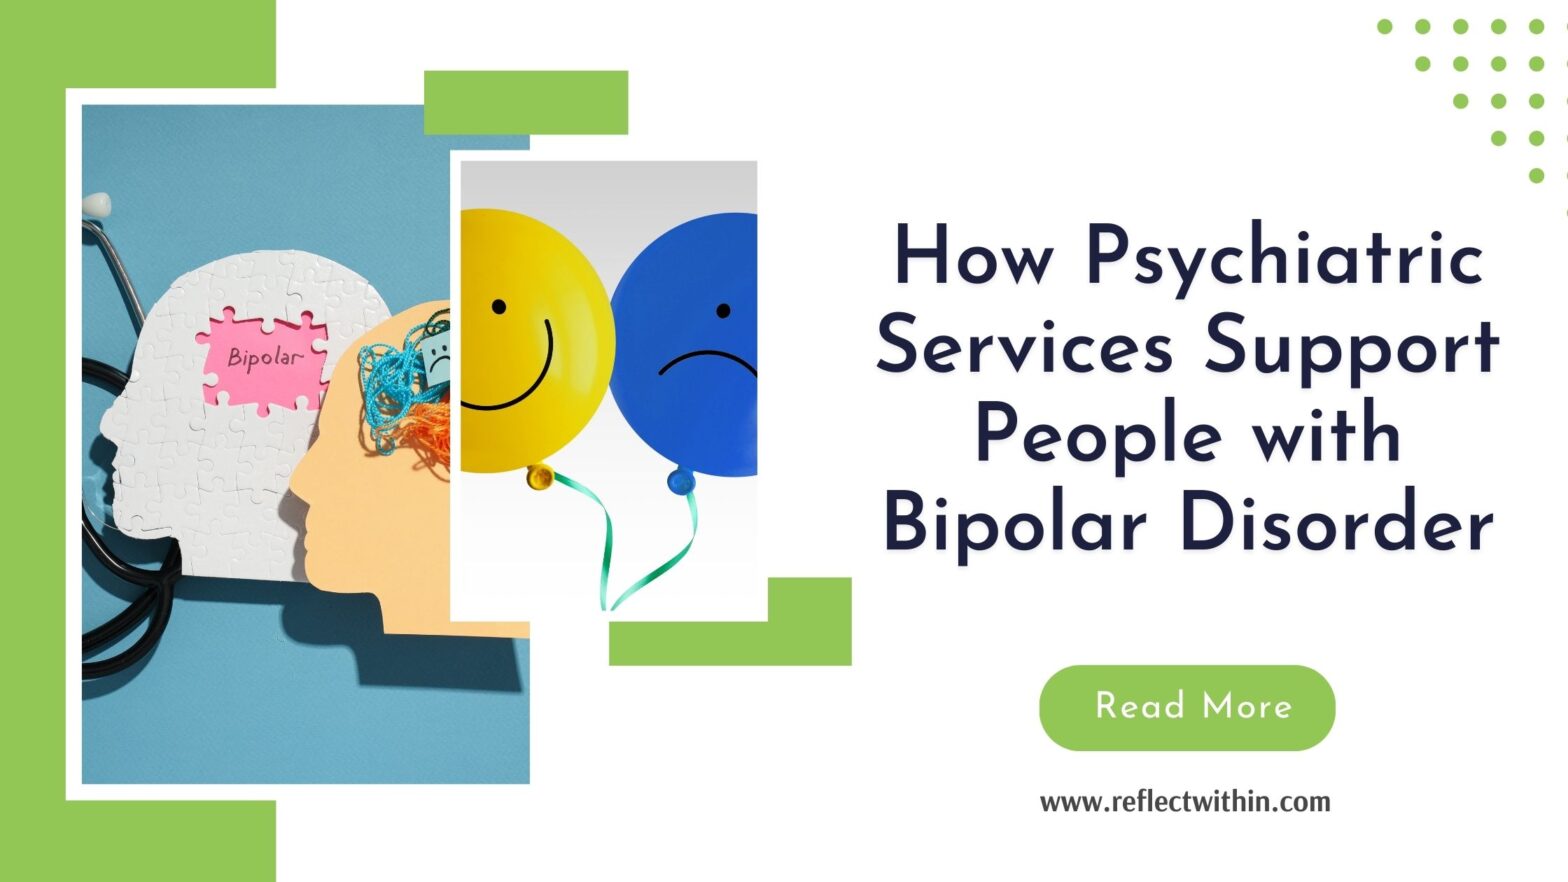 How Psychiatric Services Support People with Bipolar Disorder